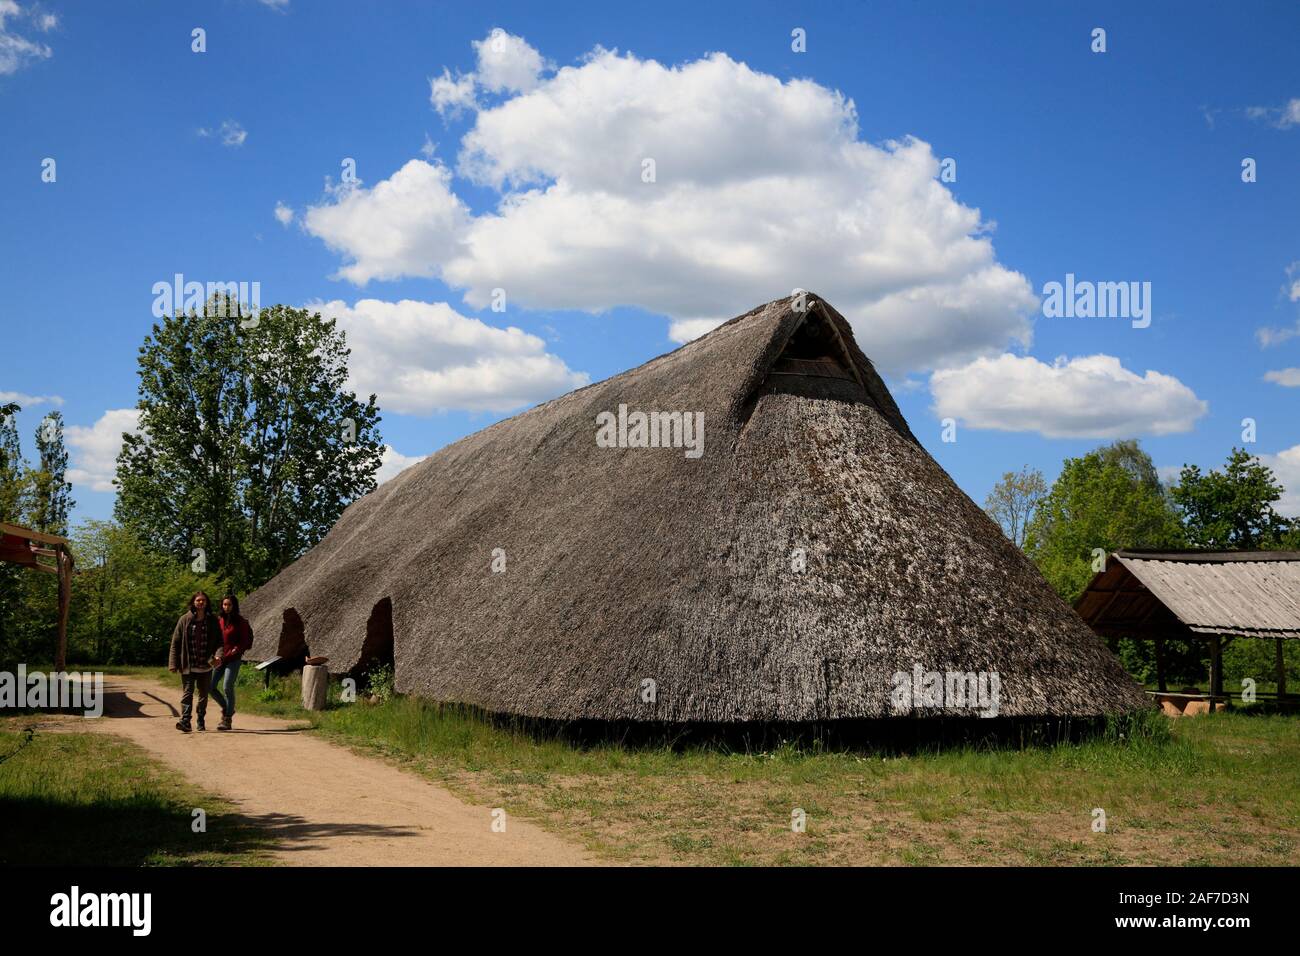 Long house in the Open air museum Archäologisches Zentrum, Hitzacker / Elbe, Lower Saxony, Germany Stock Photo